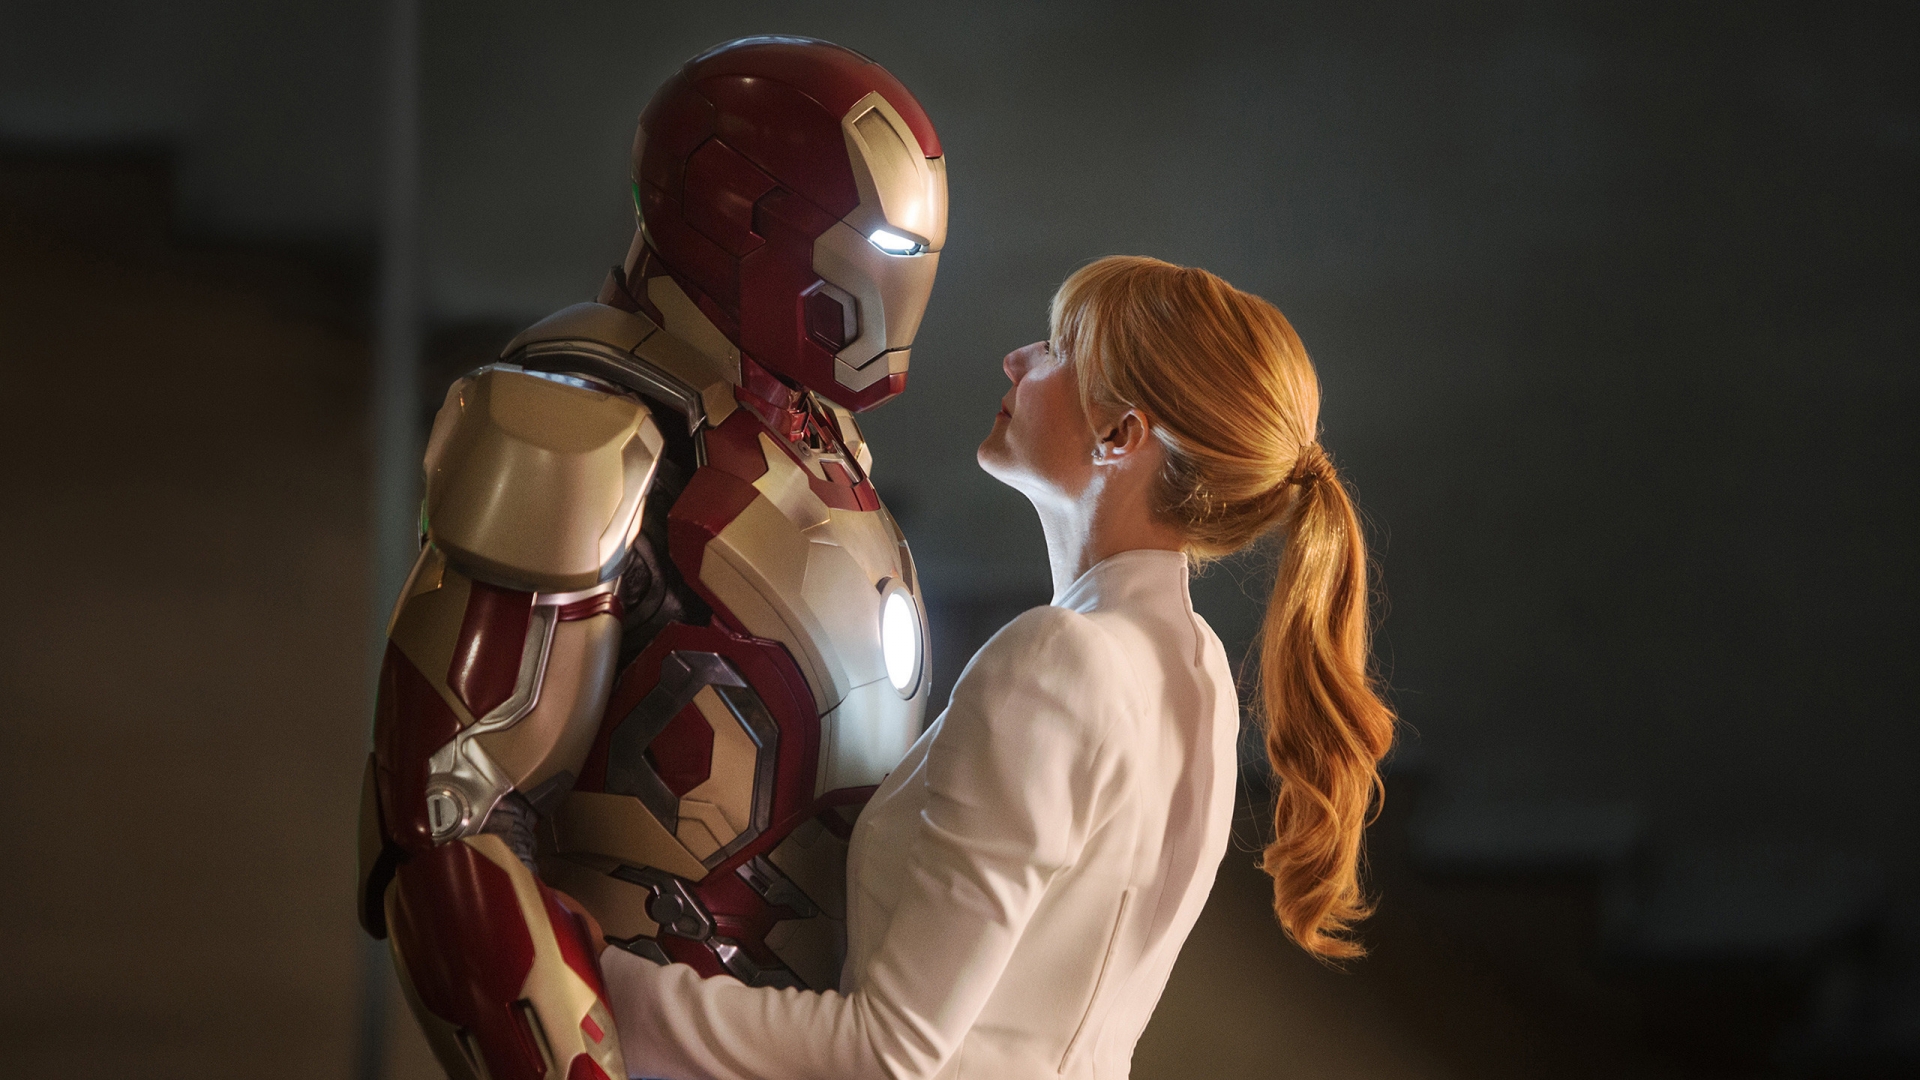 Iron Man Love For 1920 X 1080 Hdtv 1080p Resolution - Pepper Potts And Iron Man - HD Wallpaper 